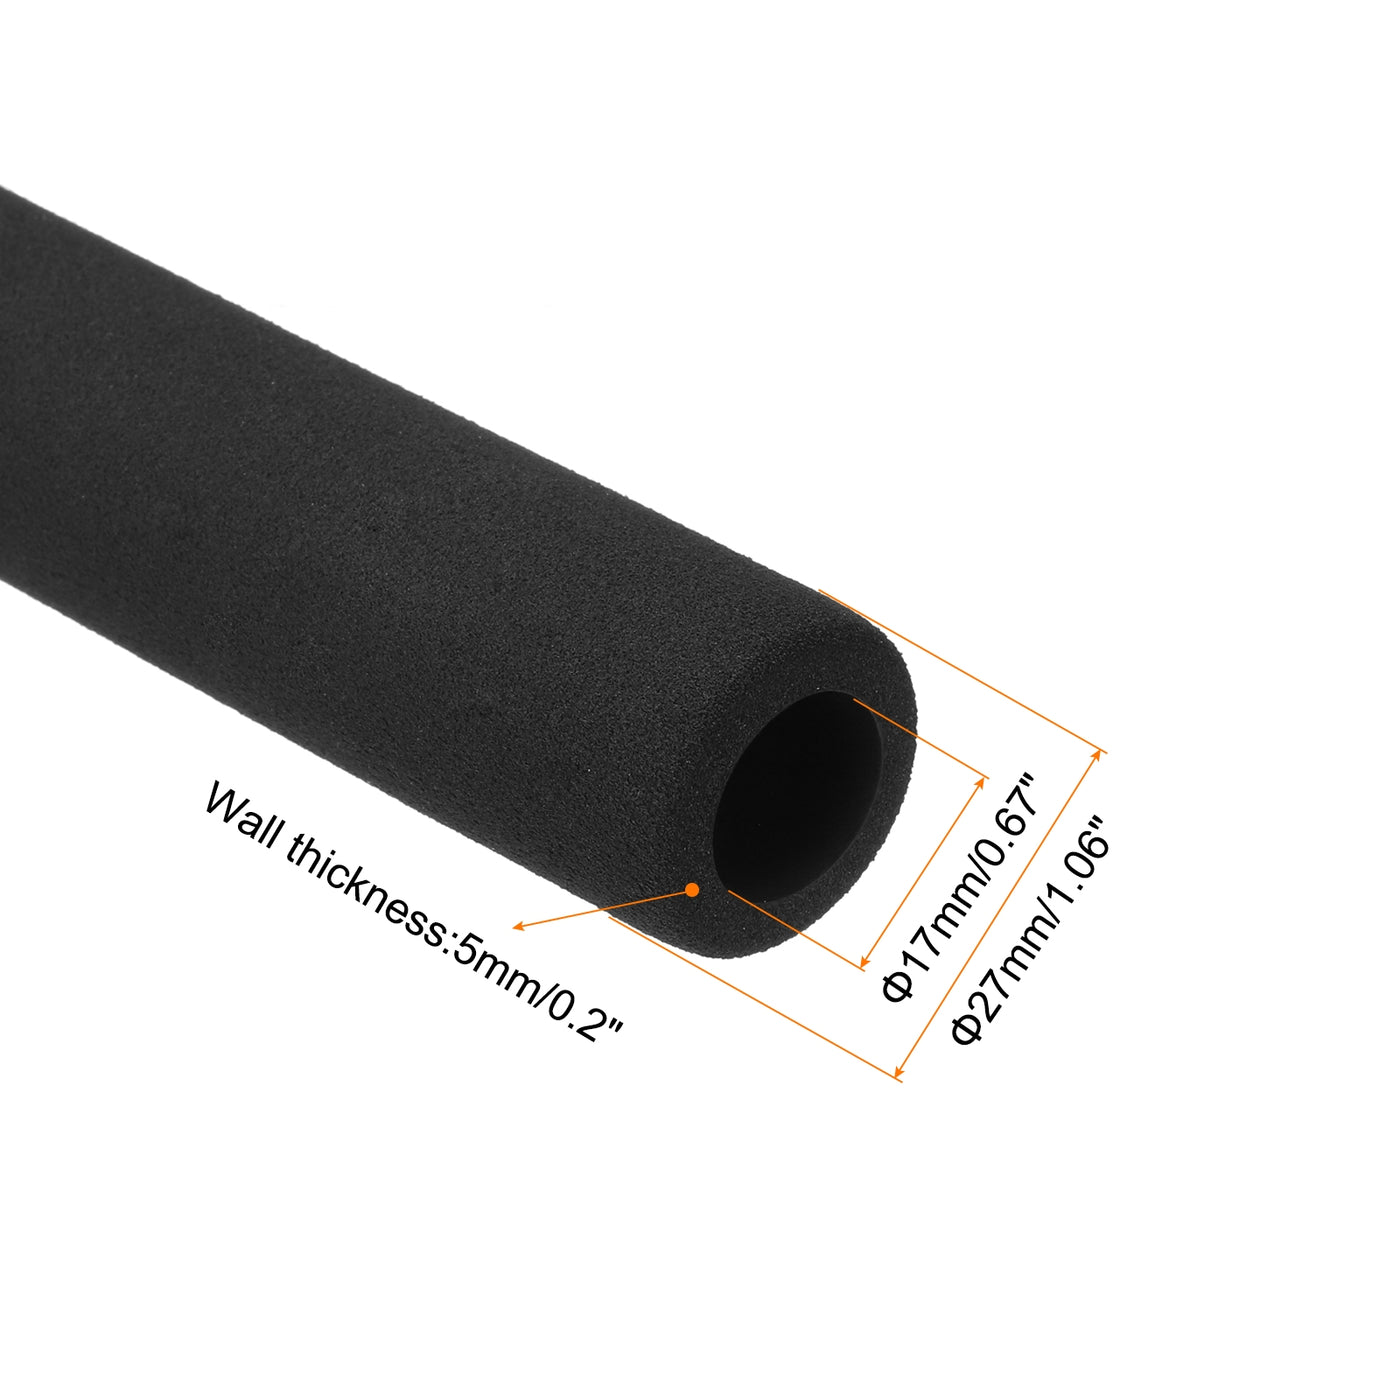 uxcell Uxcell Pipe Insulation Tube Foam Tubing for Handle Grip Support 17mm ID 27mm OD 116mm Heat Preservation Black 2pcs